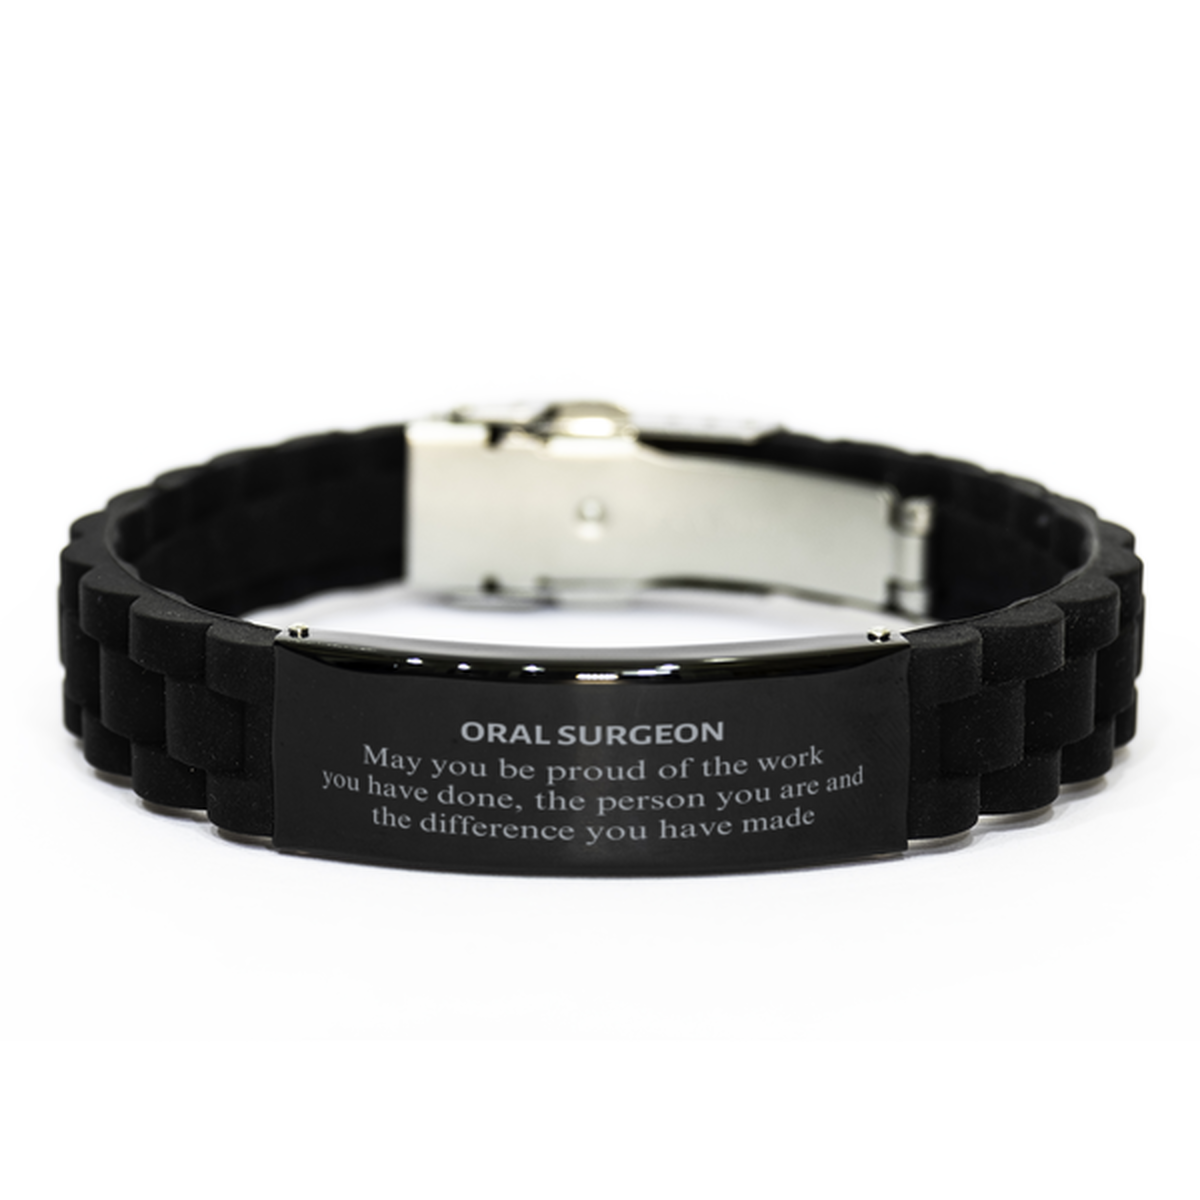 Oral Surgeon May you be proud of the work you have done, Retirement Oral Surgeon Black Glidelock Clasp Bracelet for Colleague Appreciation Gifts Amazing for Oral Surgeon